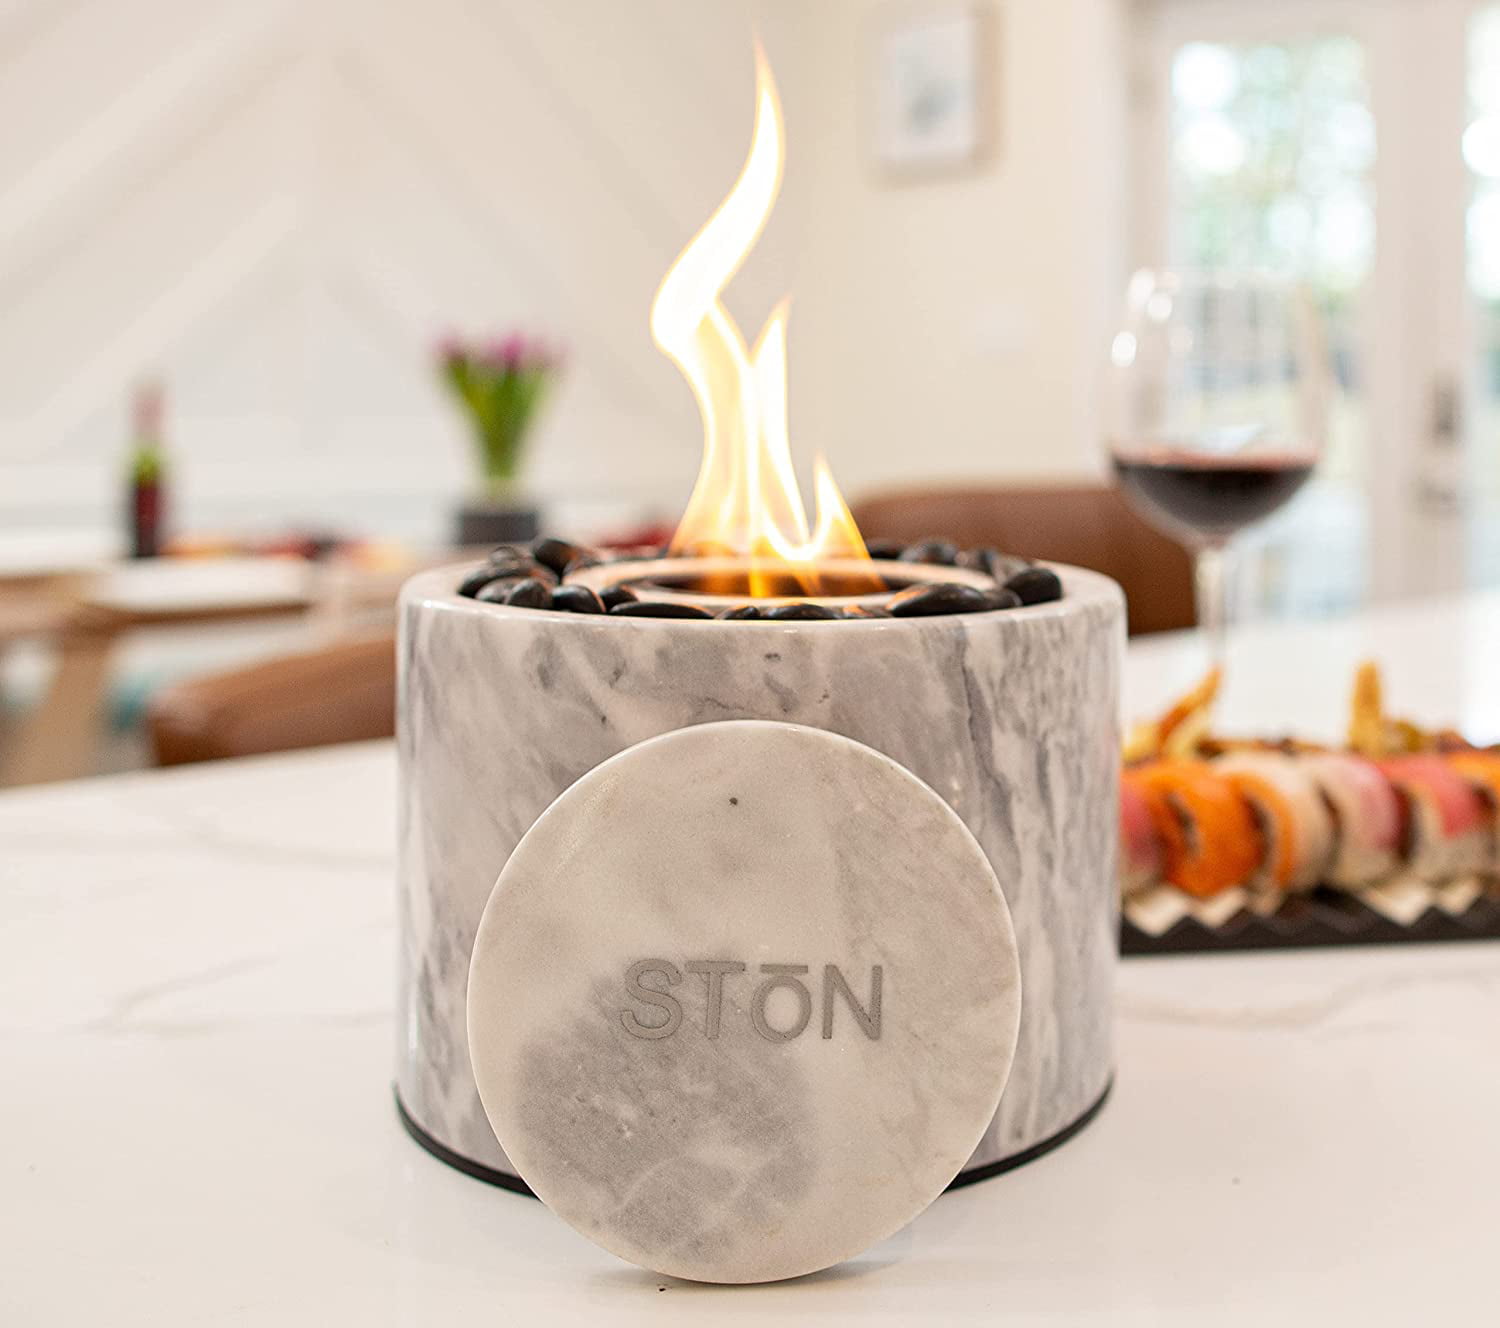 Ston Tabletop Fire Pit Bowl The, Best Tabletop Fire Pit For S Mores